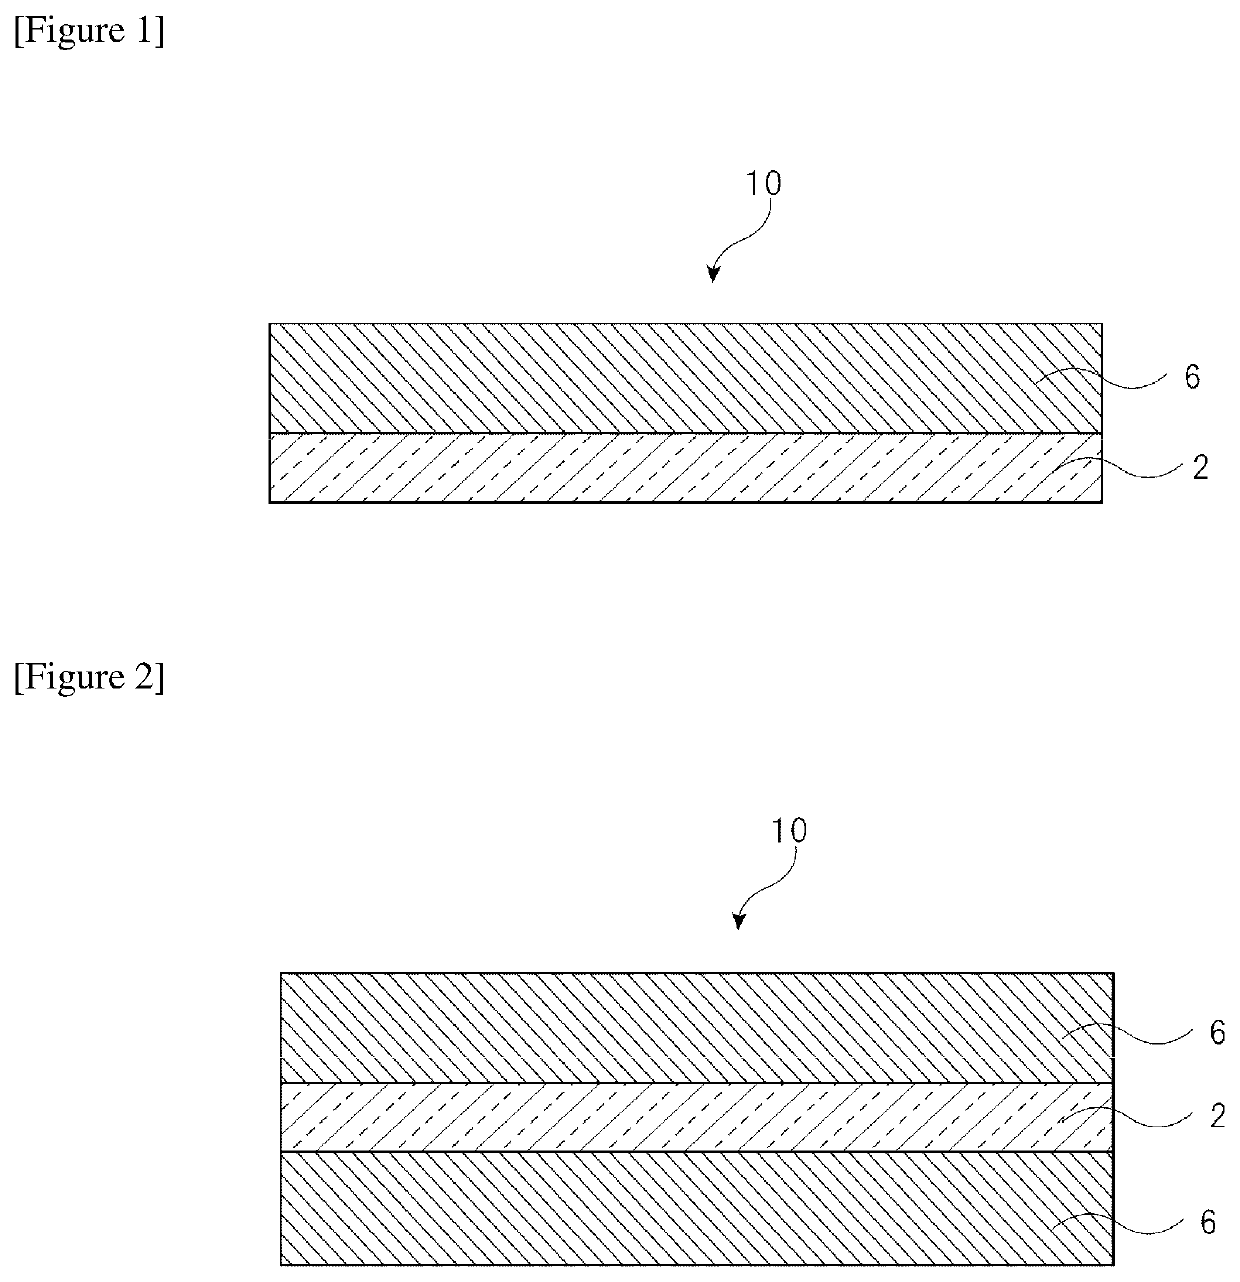 Laminate and method for producing laminate